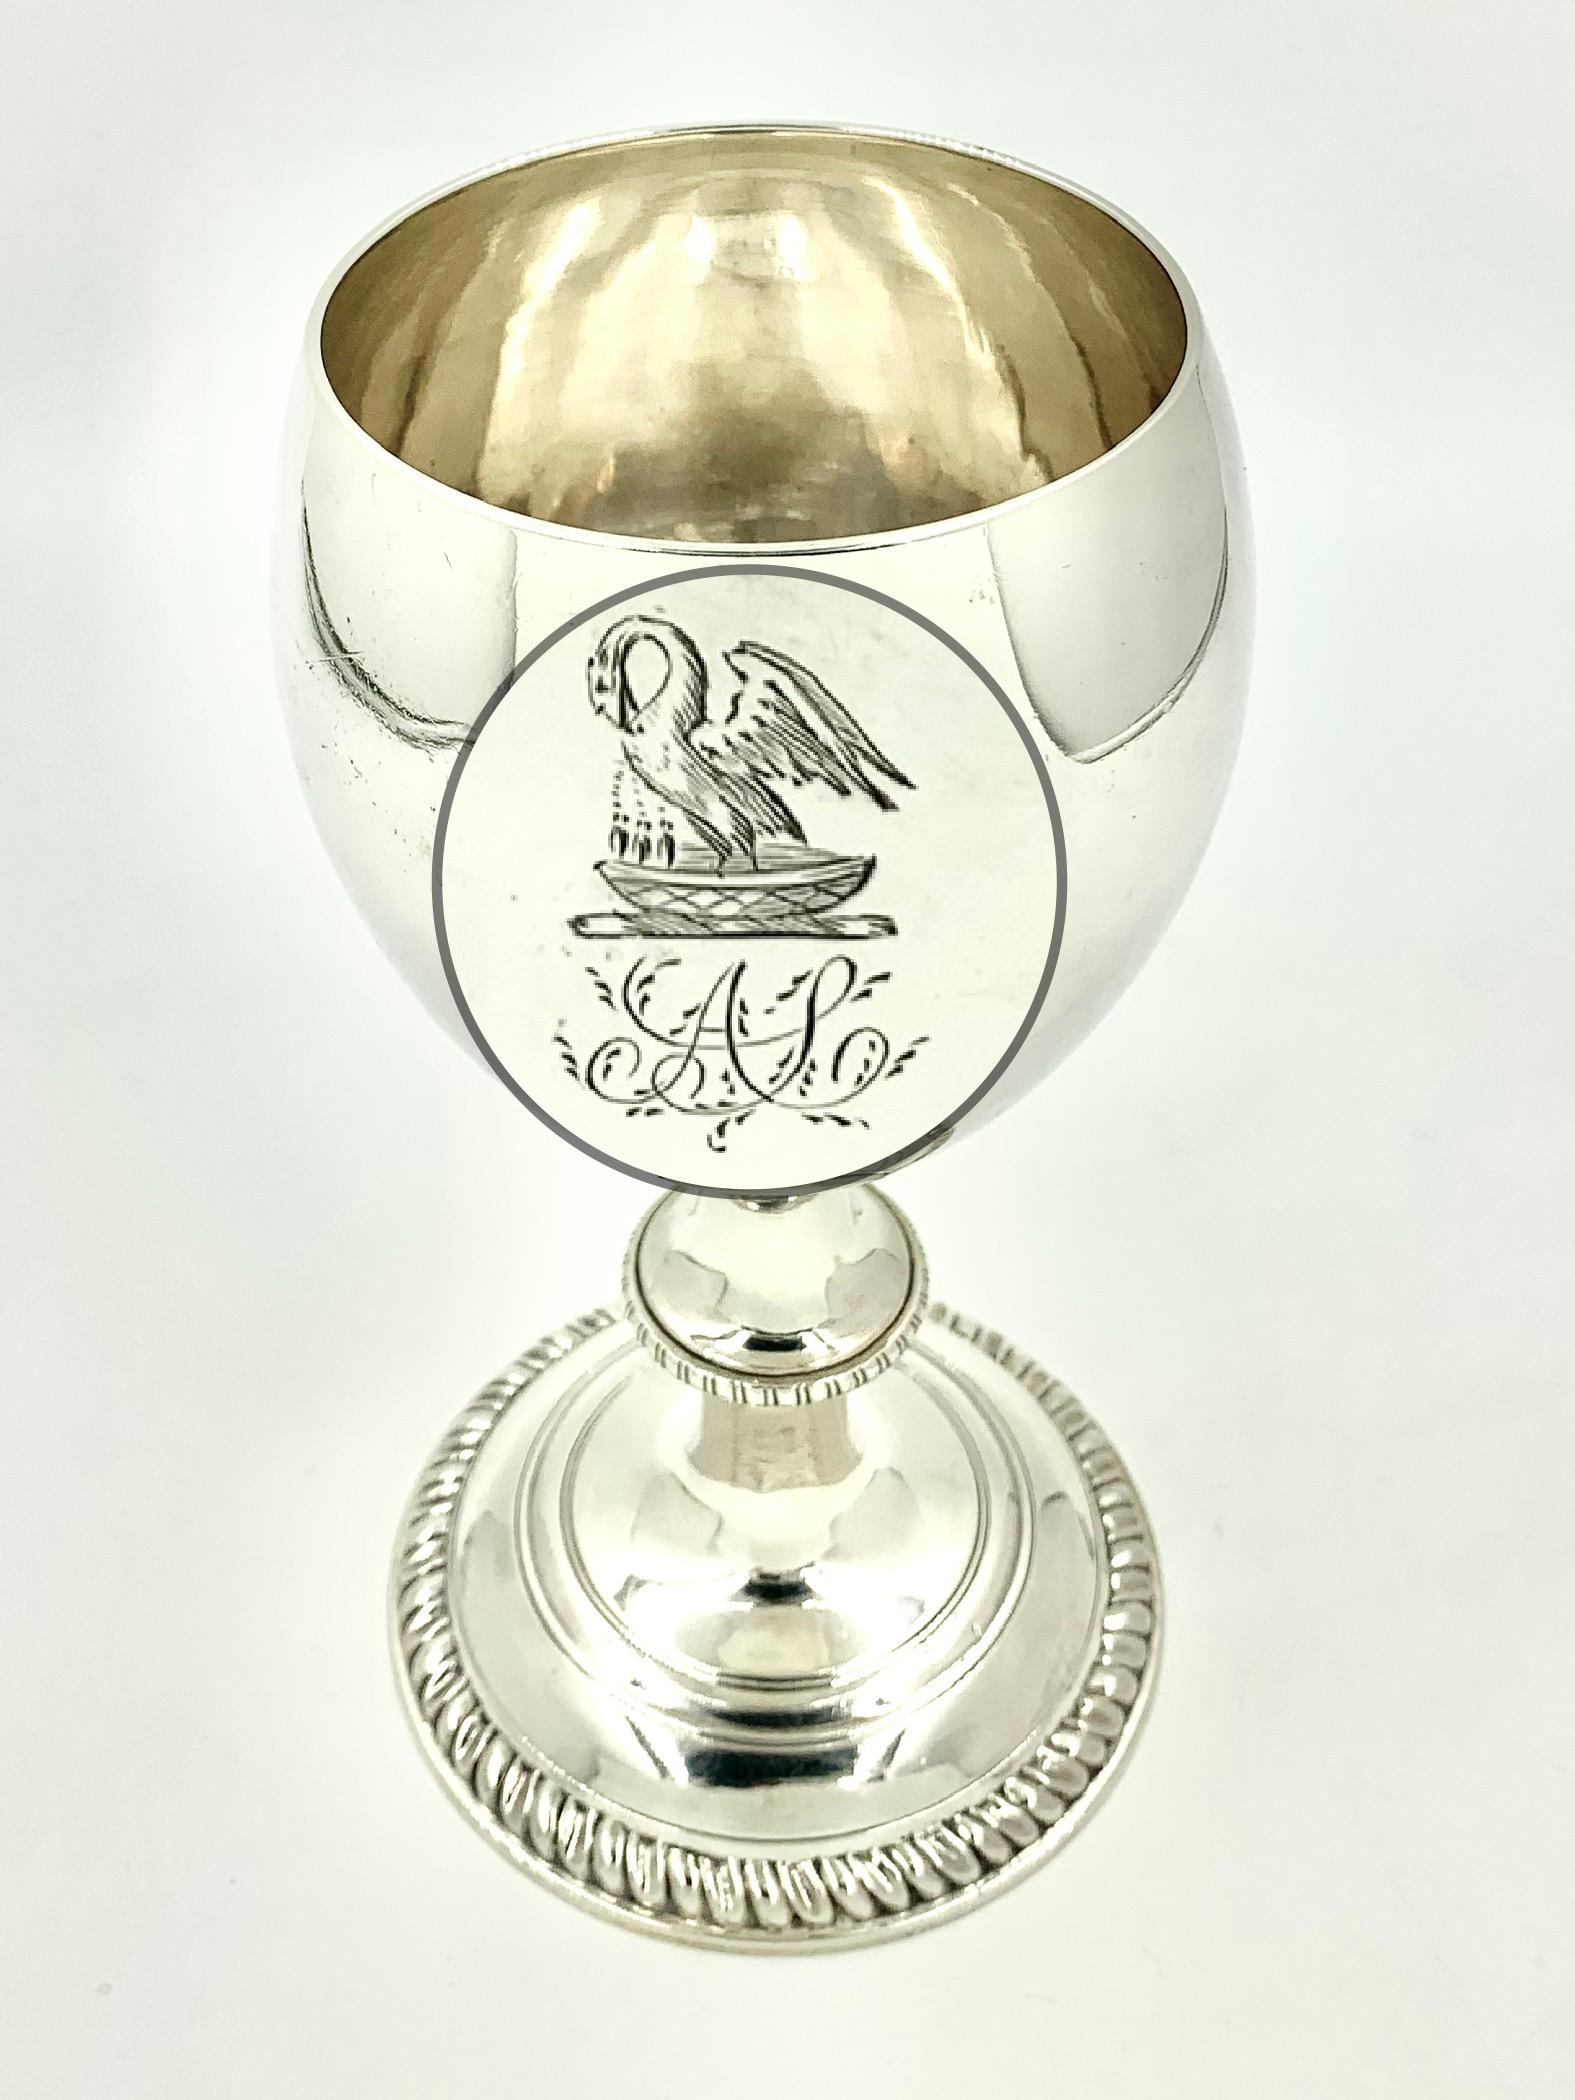 18th Century George III period sterling silver goblet by Charles Aldridge & Henry Green, 1769-1785, with a beautifully engraved swan armorial device and elaborate initials AL. The piece is fully hallmarked on the base. Due to the highly reflective